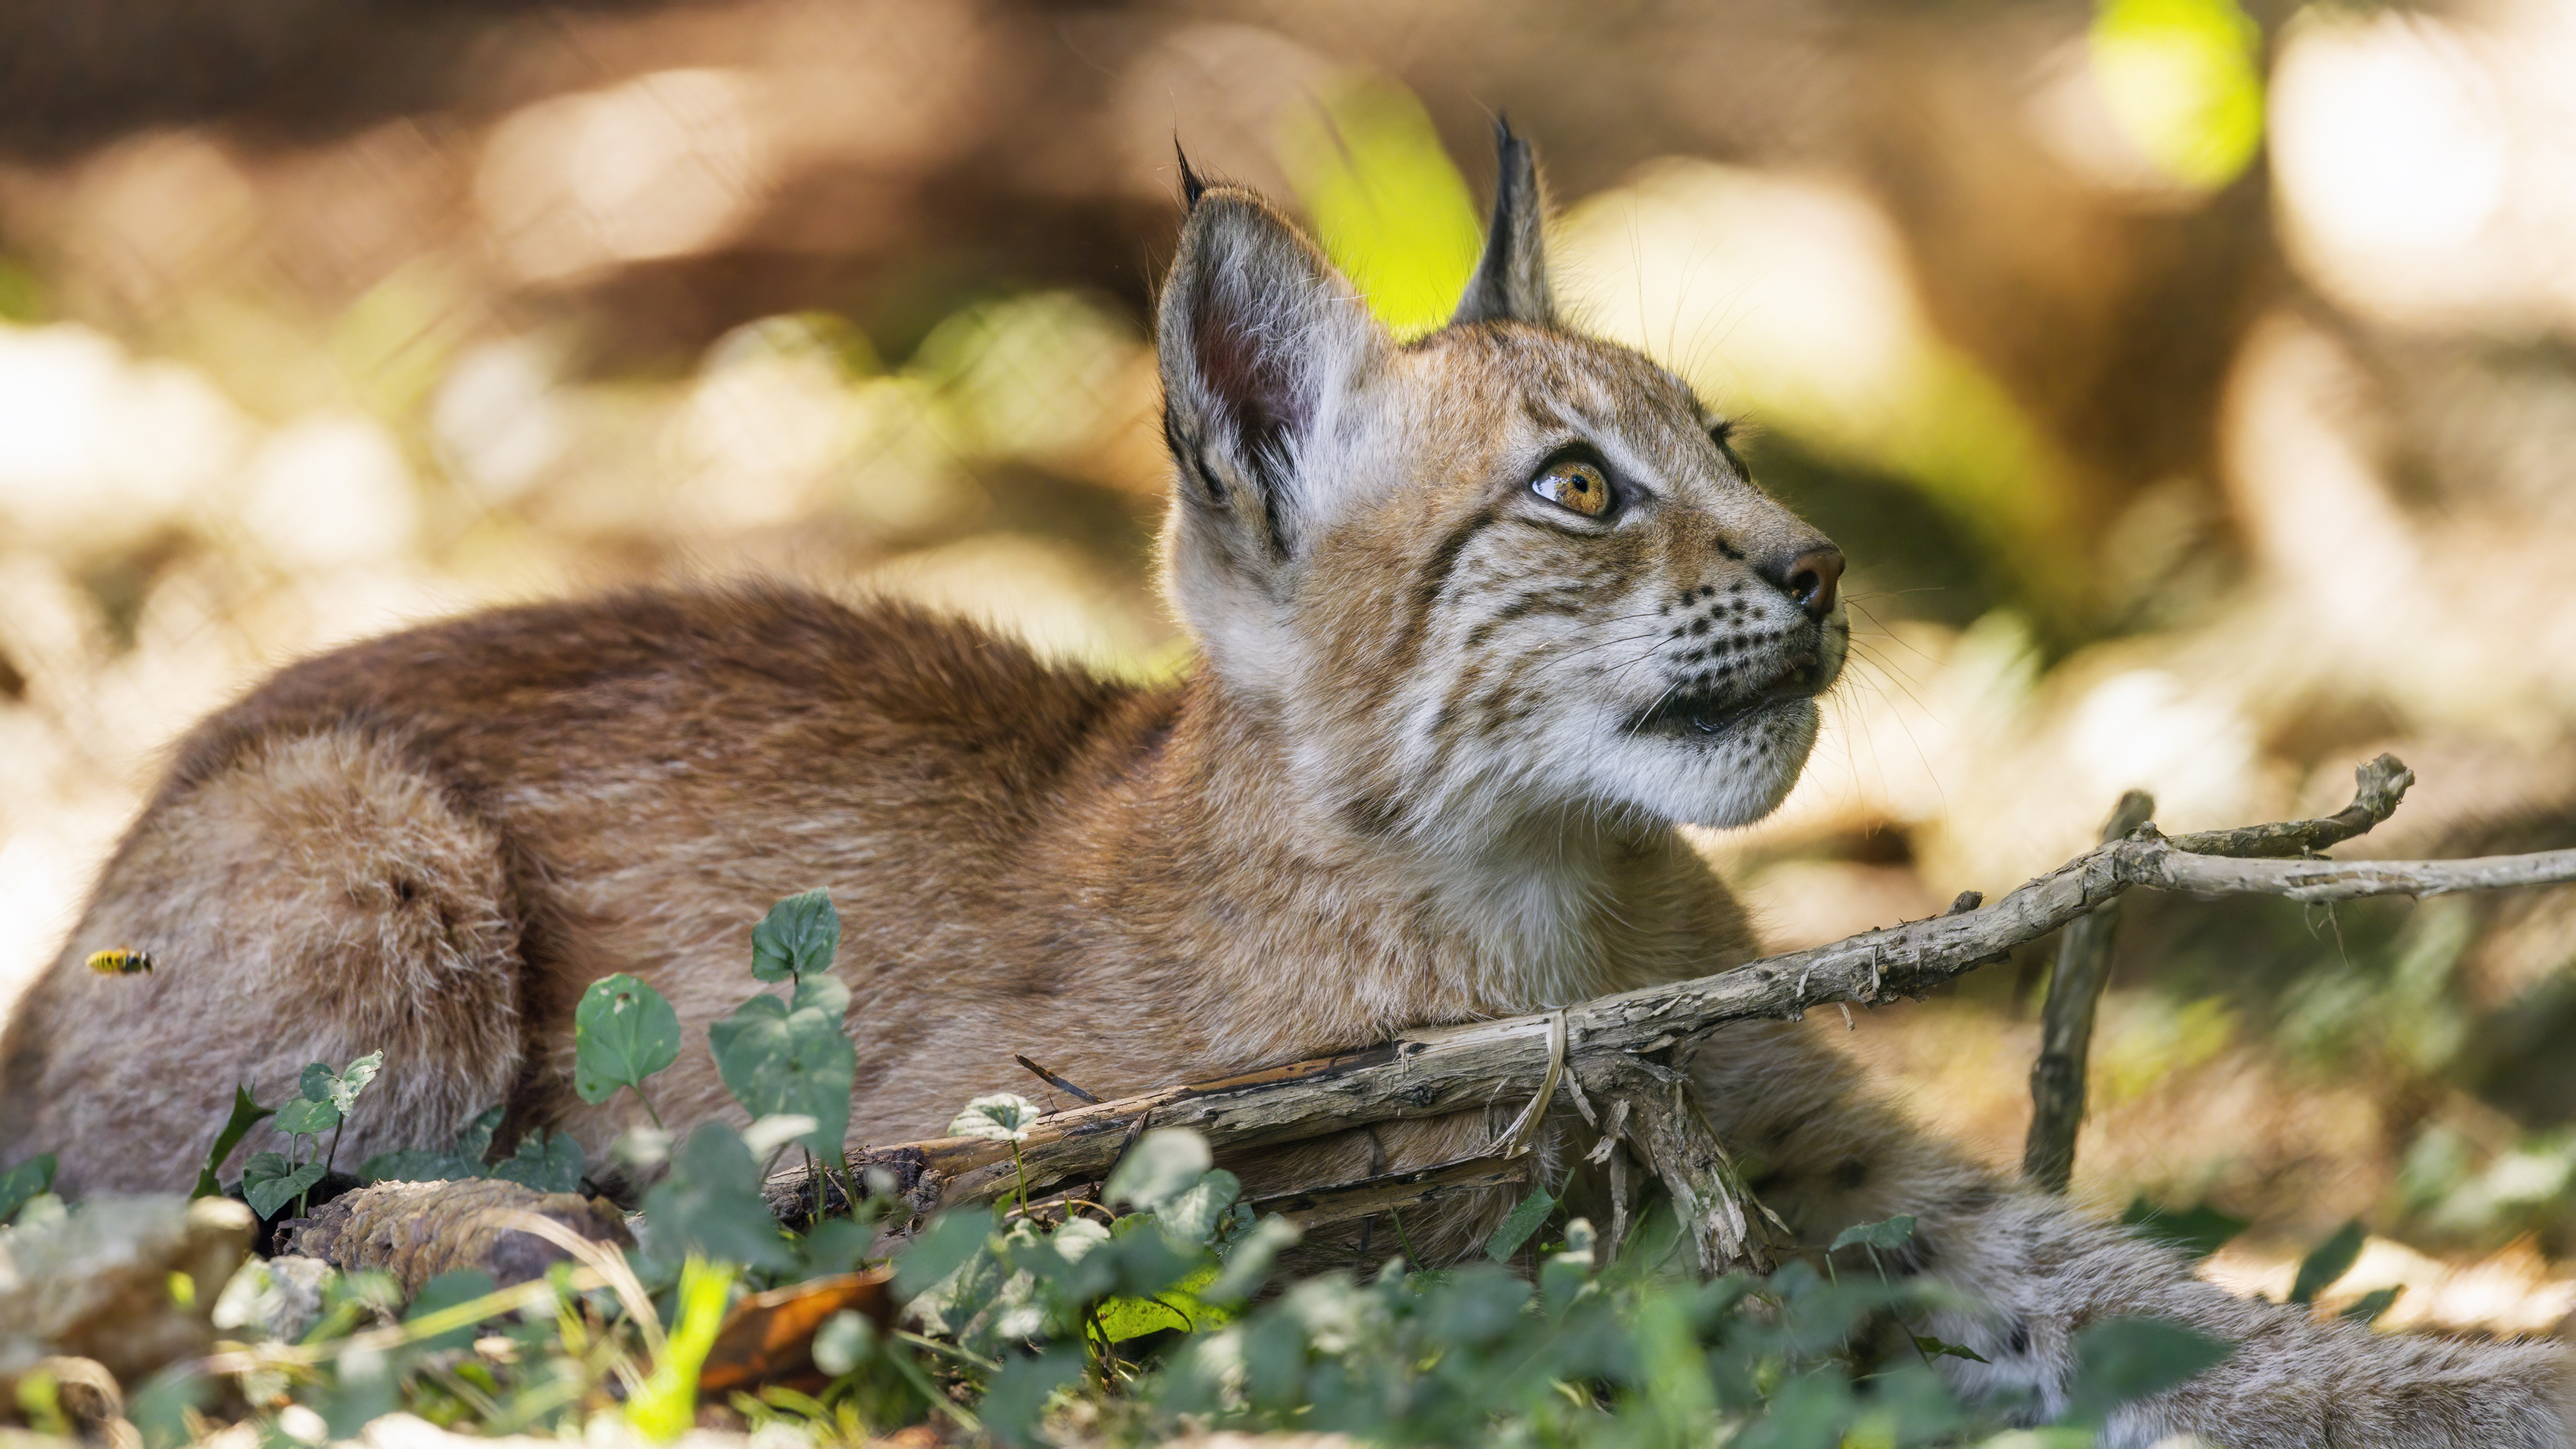 The little lynx looks up in the blurry background